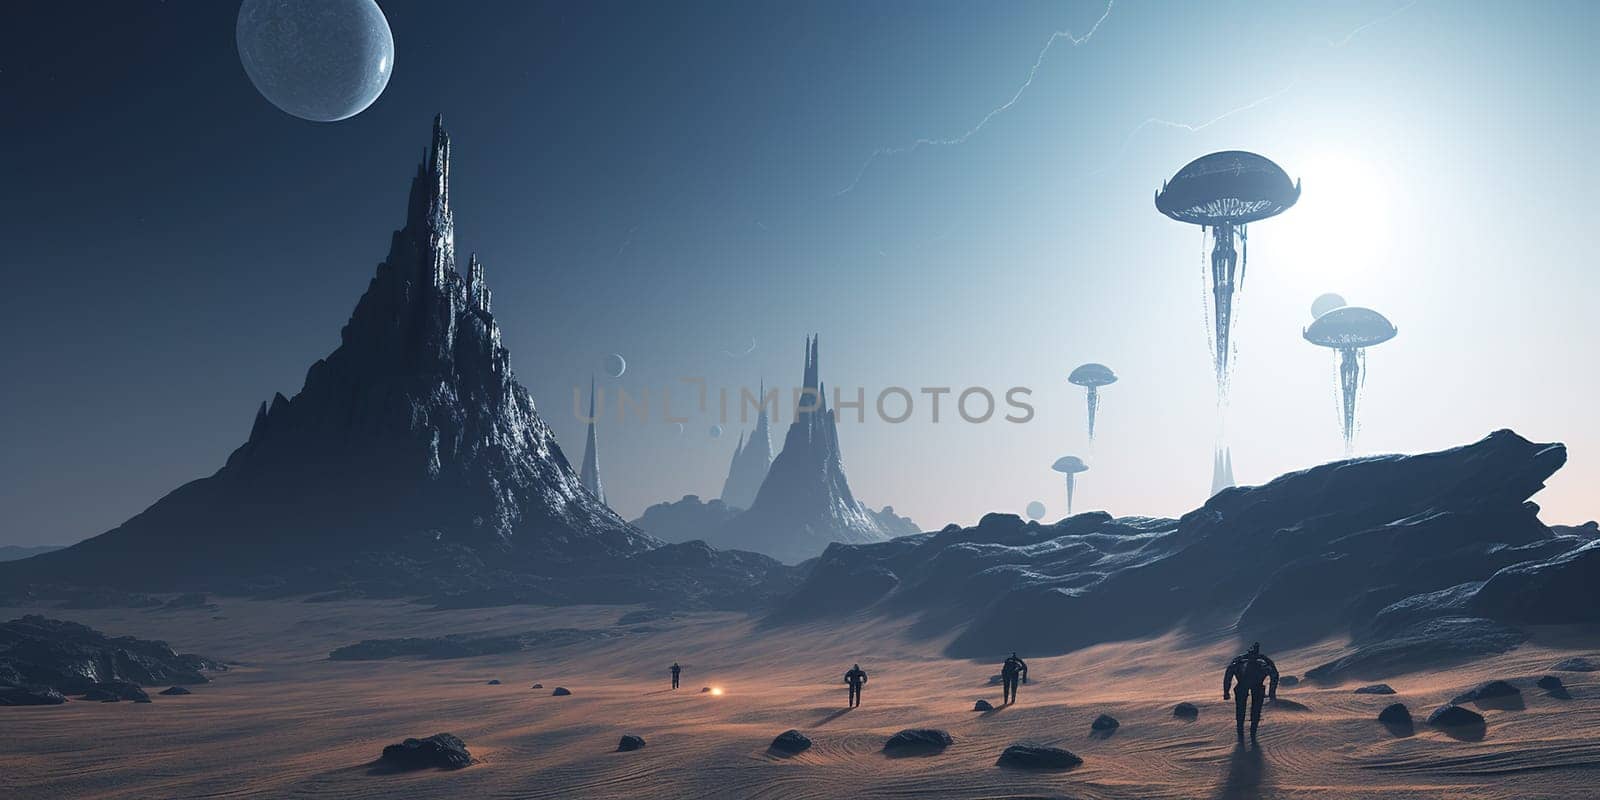 Extraterrestrial Civilization And Flying Ships Exist On A Distant Planet